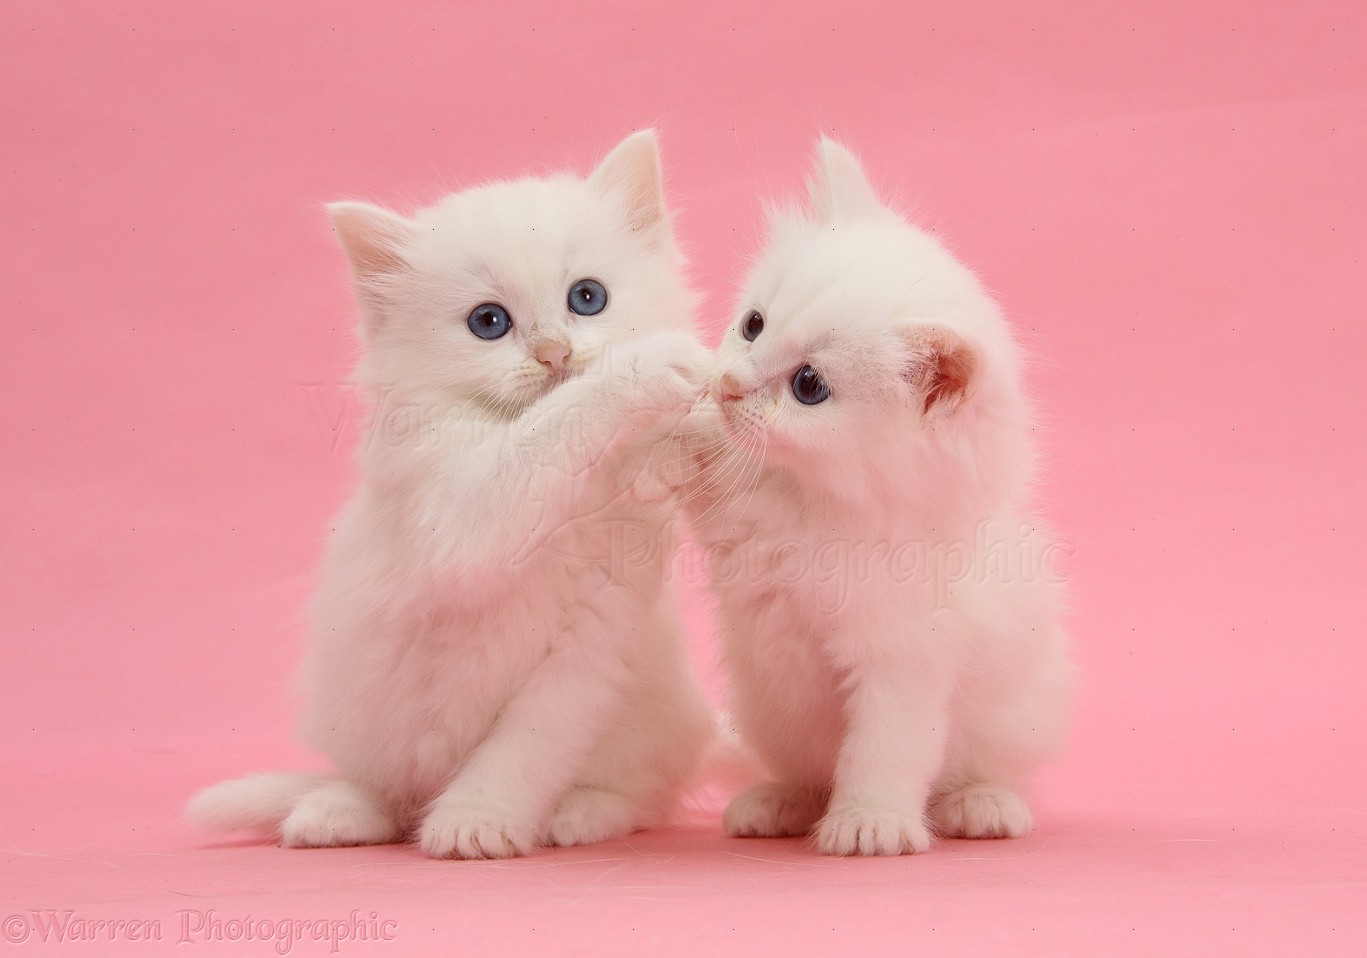 Two white kittens on pink background photo WP27070